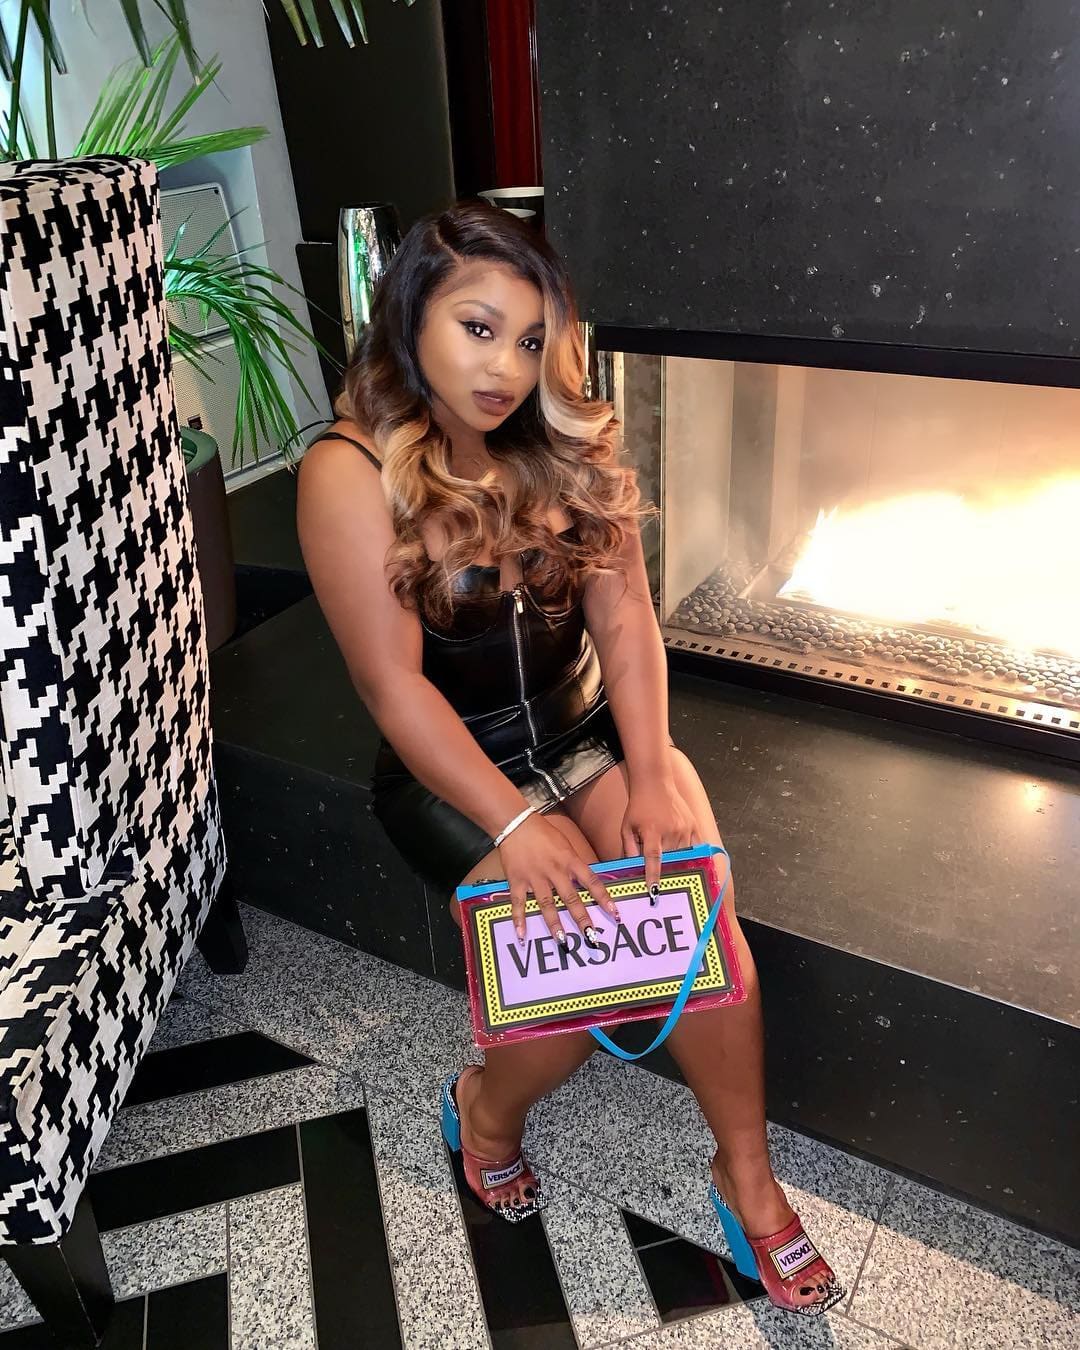 Reginae Carter Has An Optimistic Message For Fans - People Assume She Found Love Again